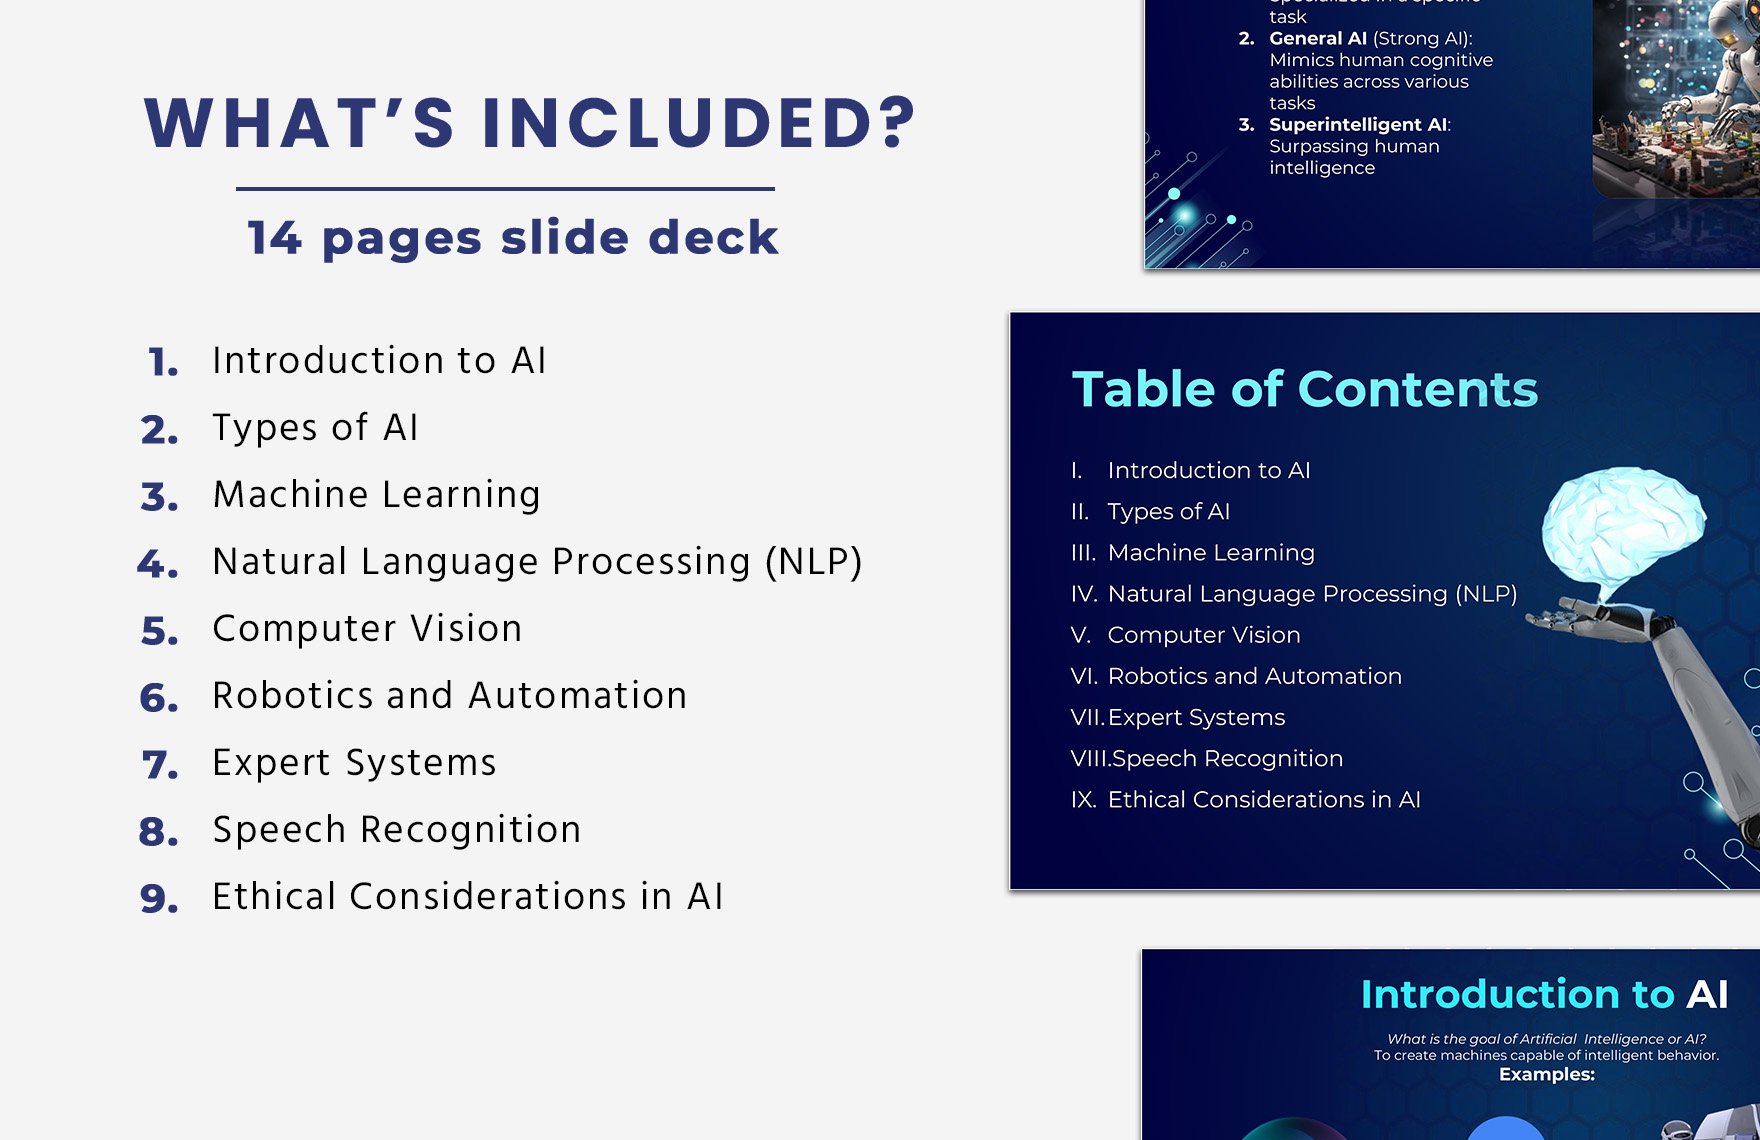 Introduction to Artificial Intelligence Template